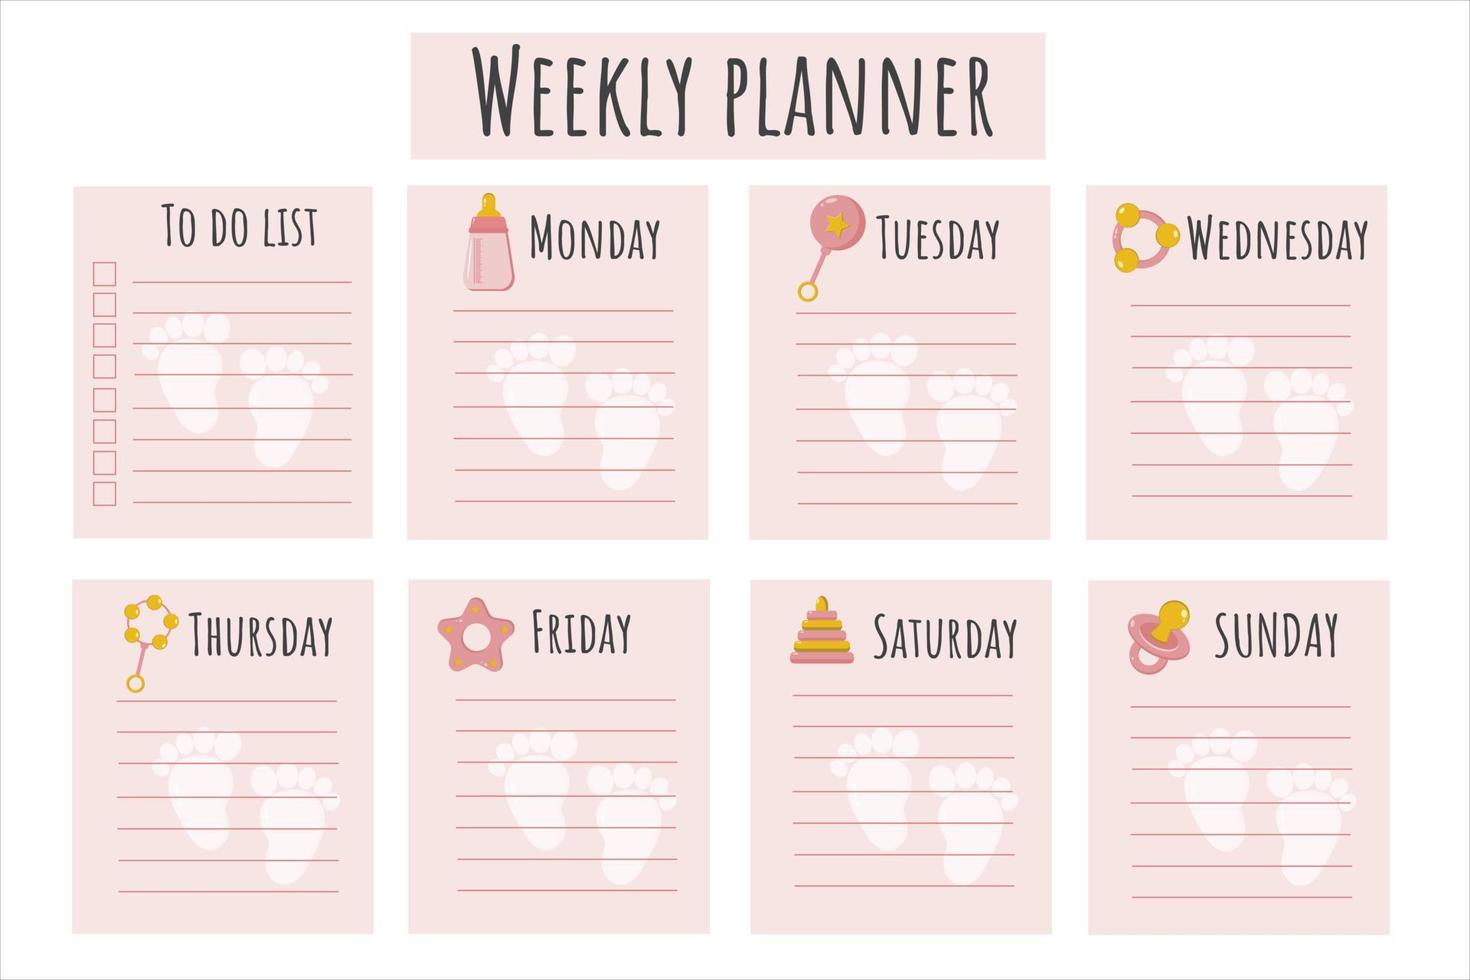 Schedule for the baby's mom. Schedule for the week for the girl's mother. A place to take notes, organizer for the day of the week for planning. Young mom's schedule. Weekly planner for mom. vector